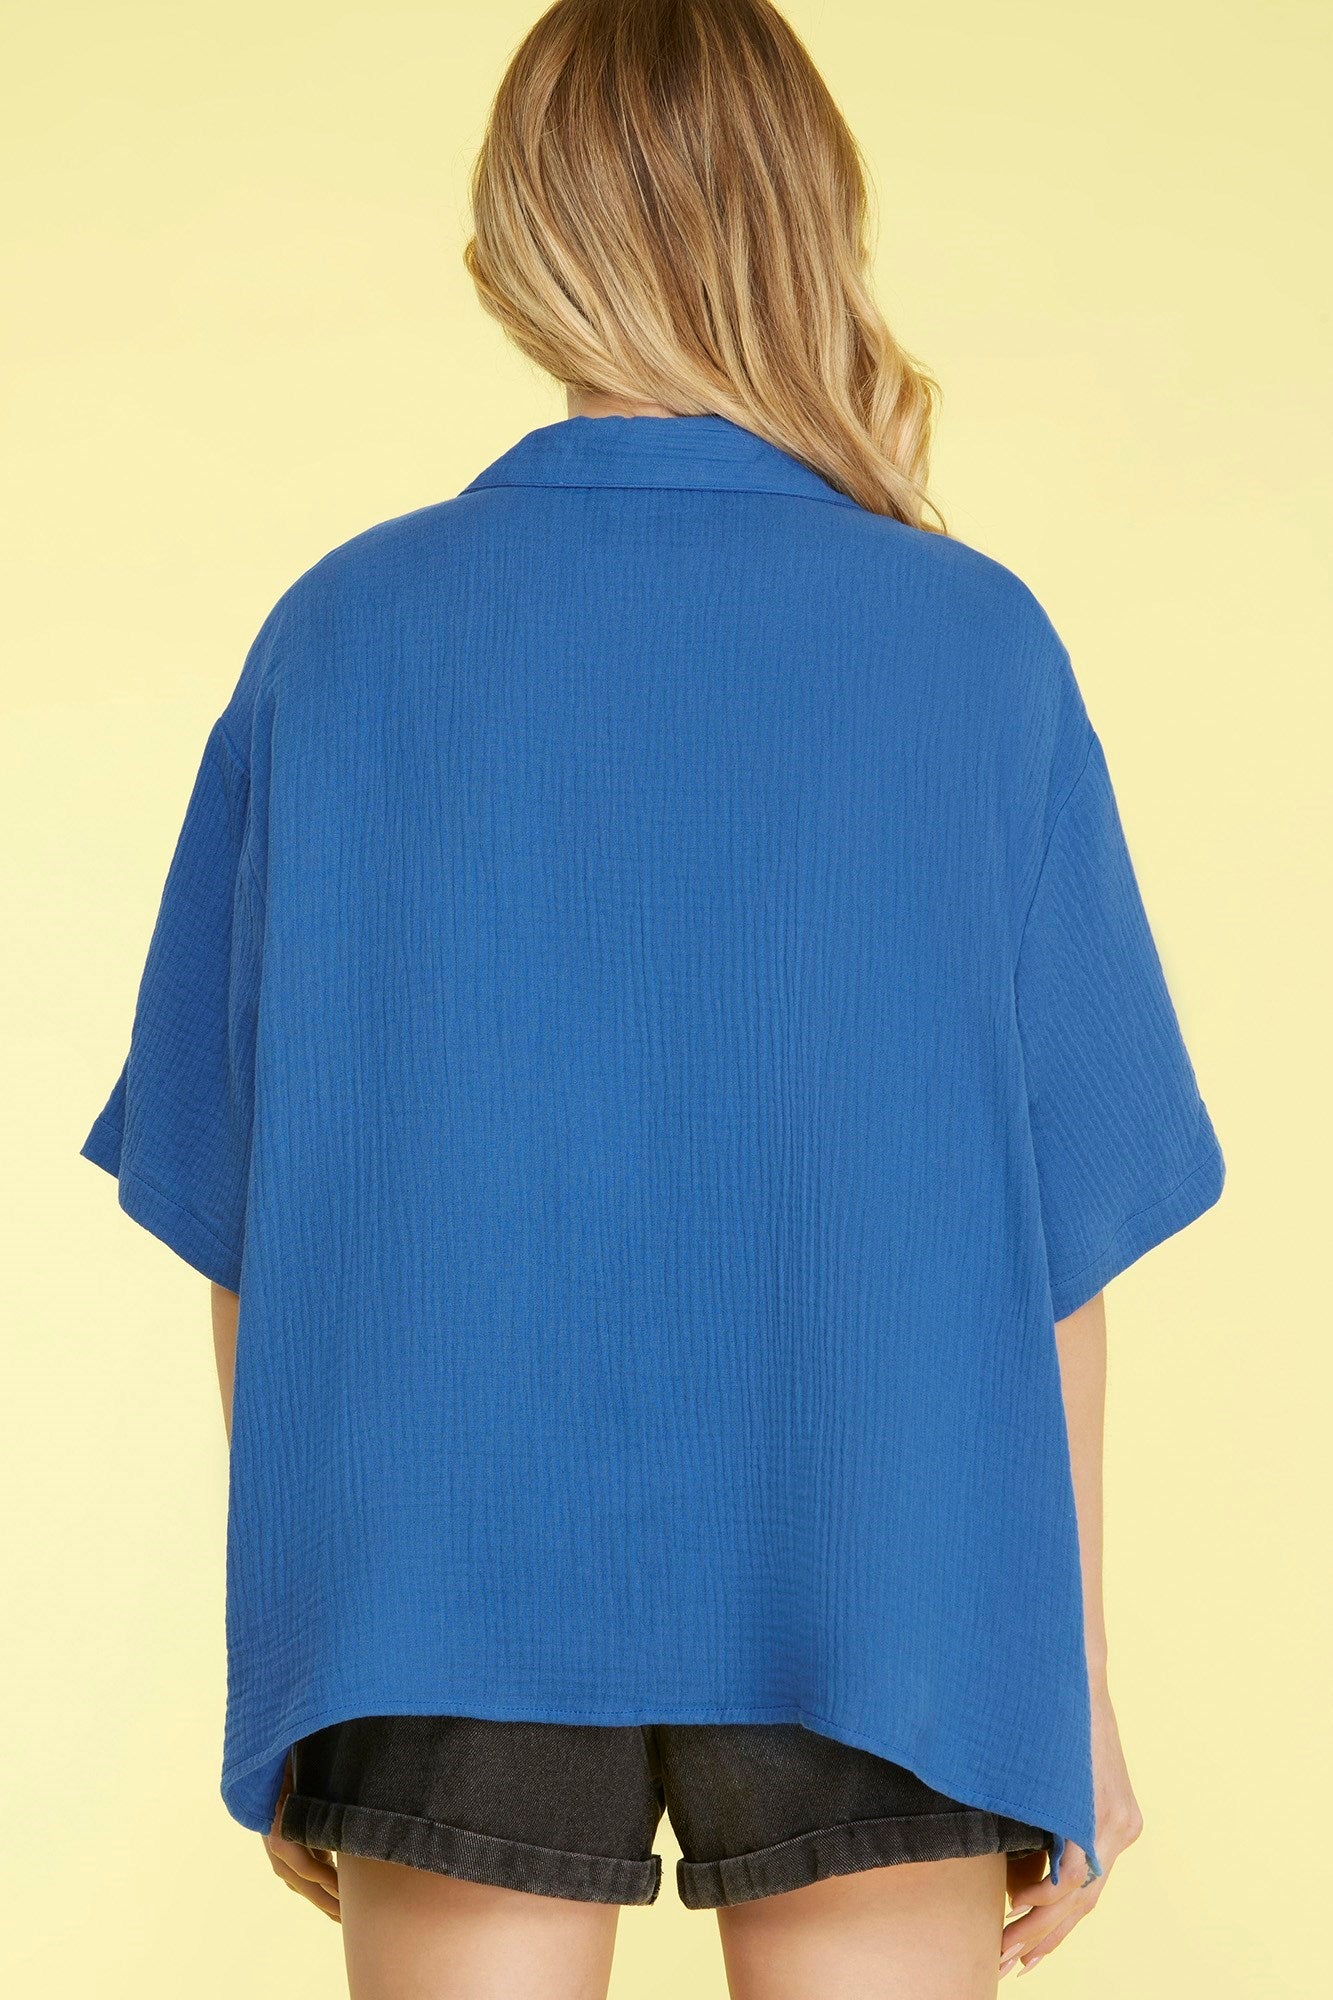 WOVEN BUTTON-DOWN TOP WITH FRON POCKET - BLUE